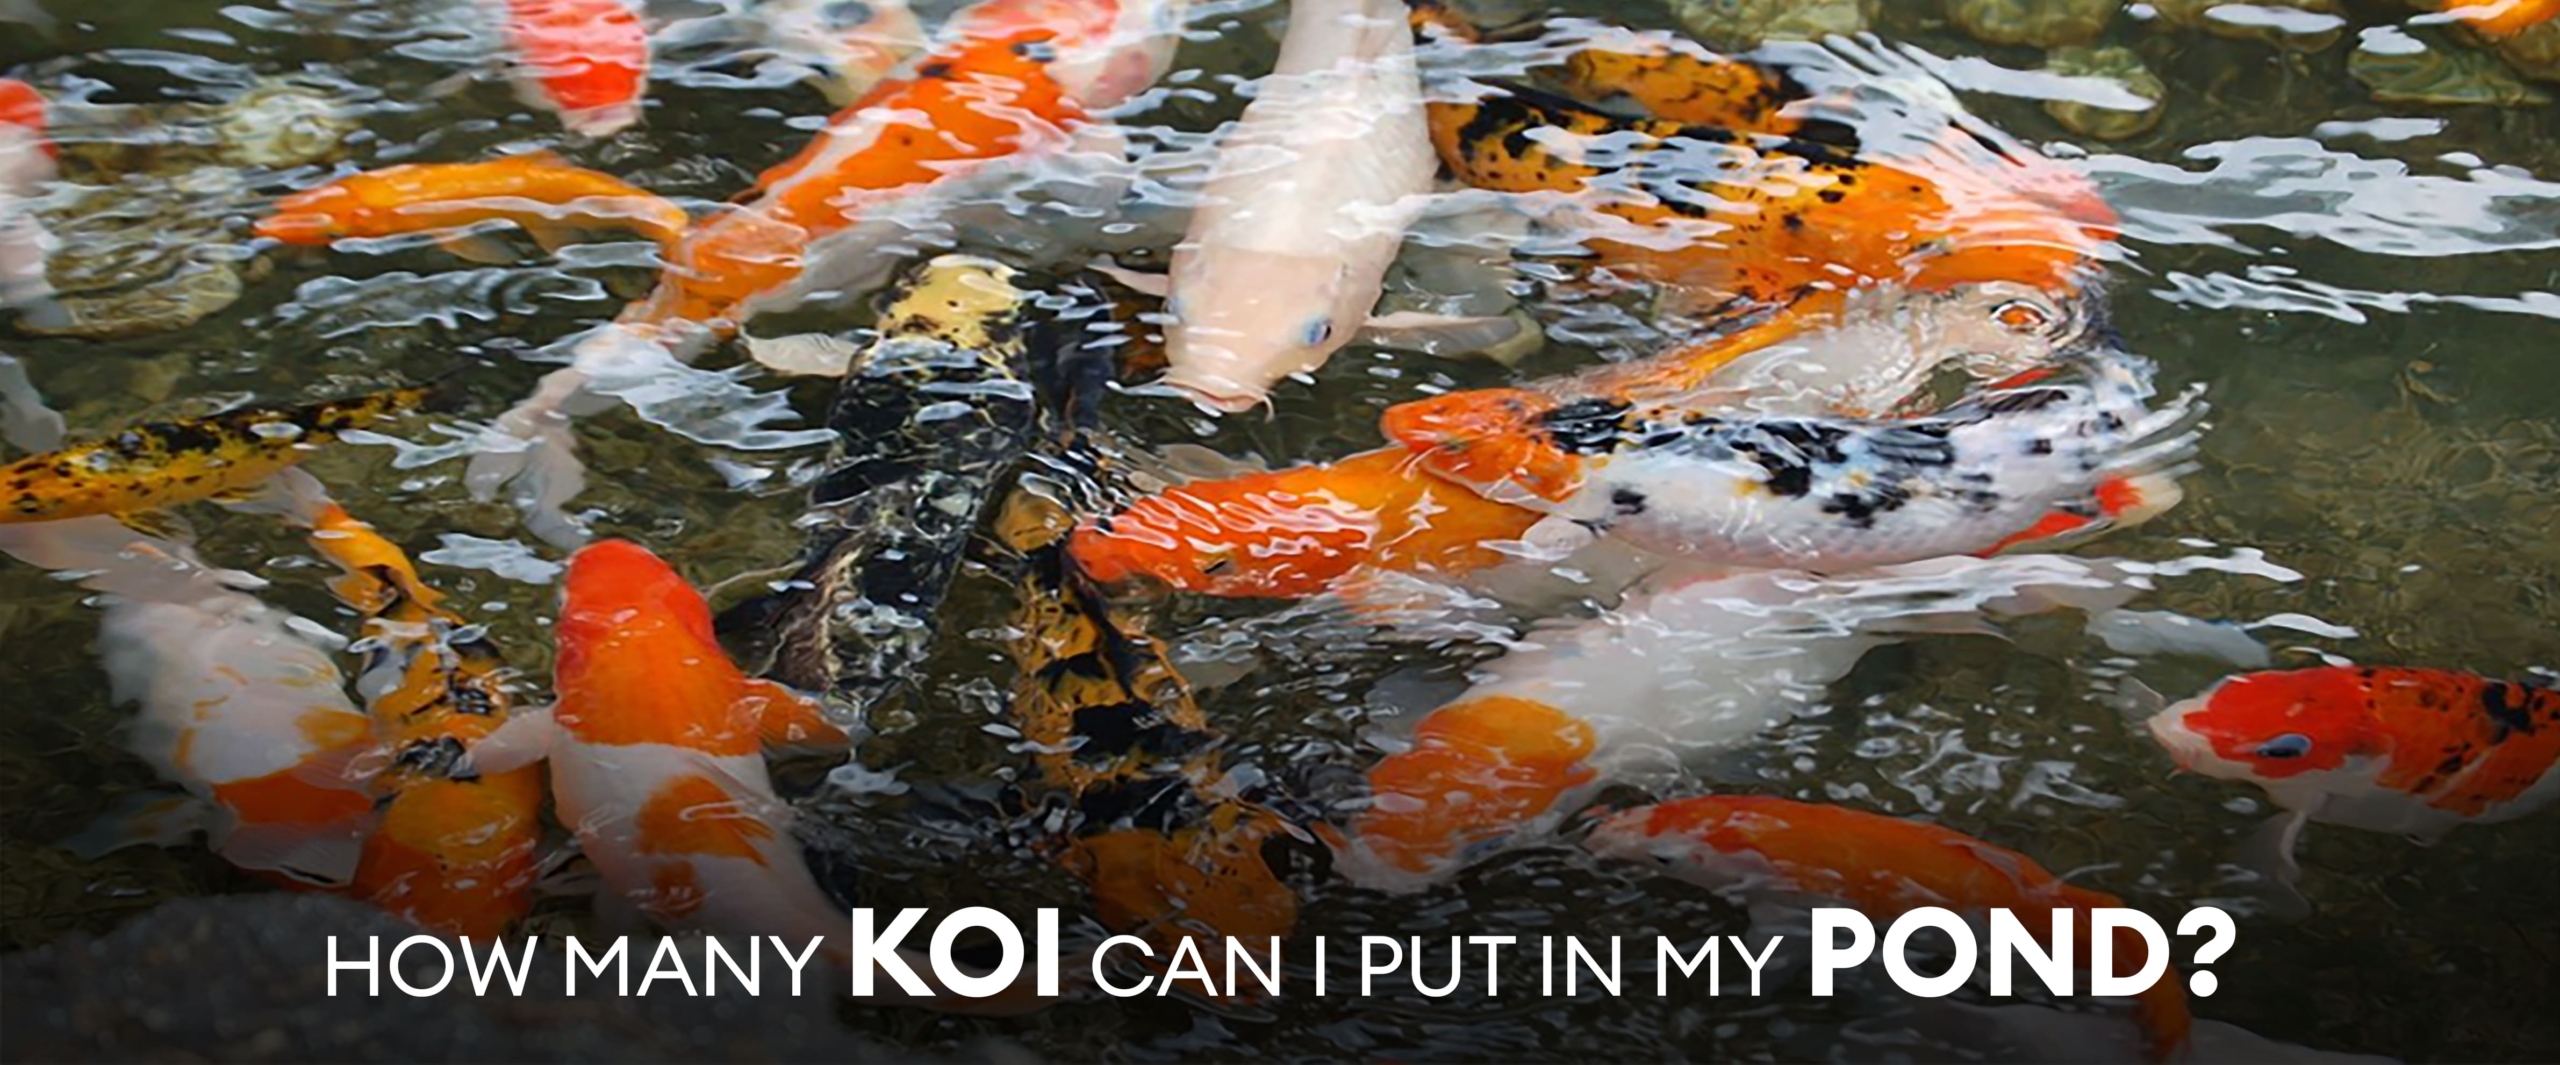 How many koi can I put in my pond-min